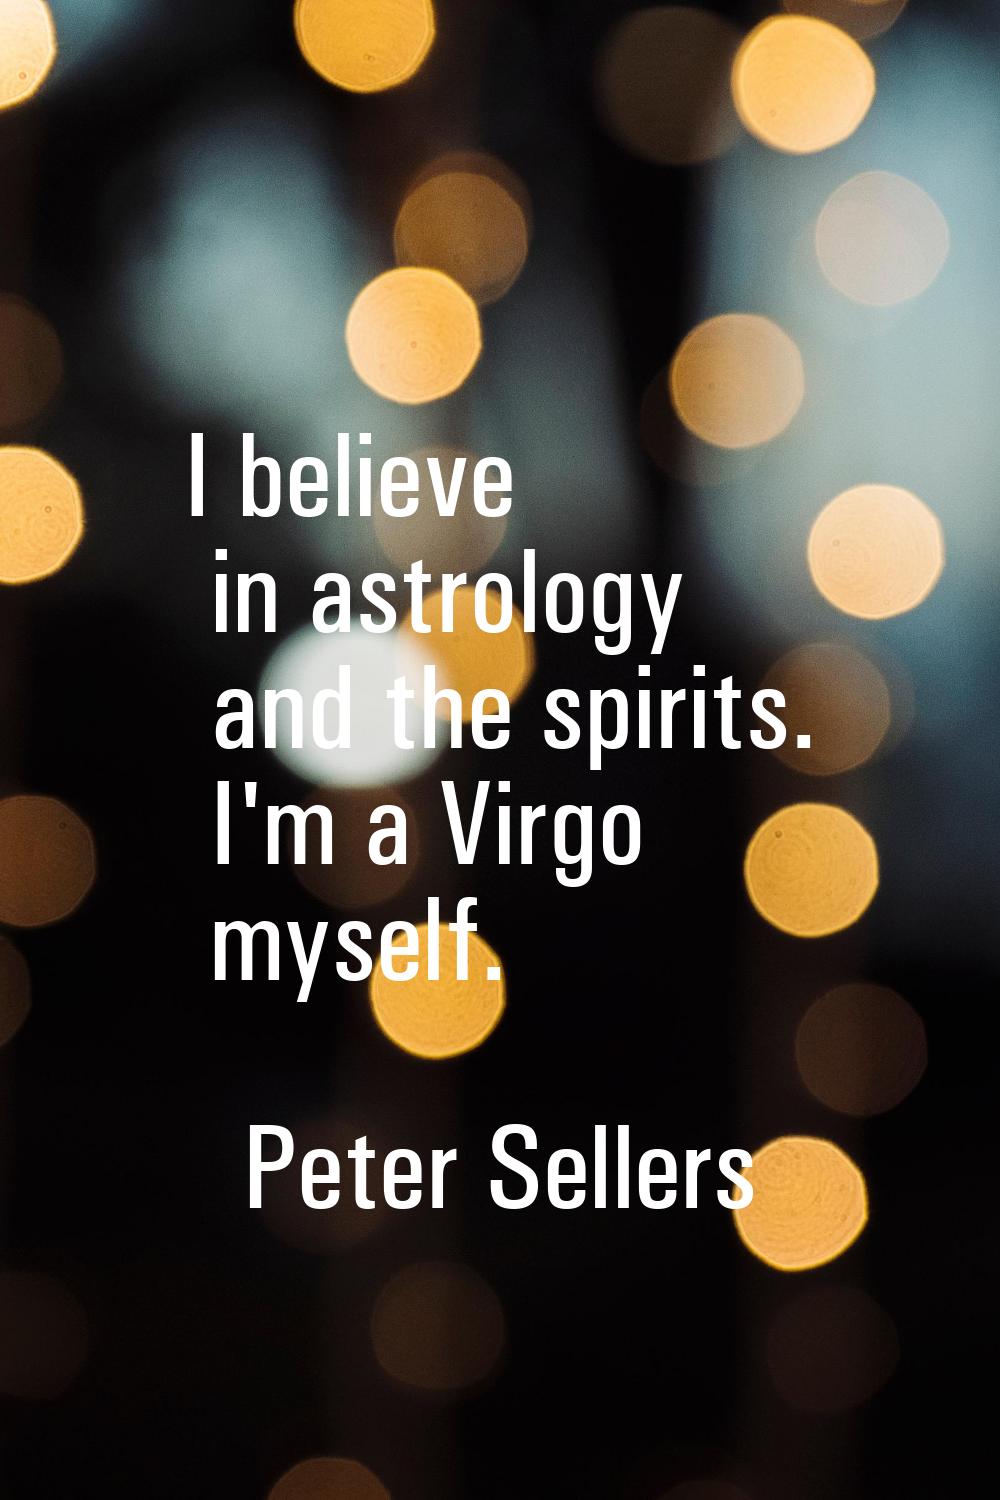 I believe in astrology and the spirits. I'm a Virgo myself.